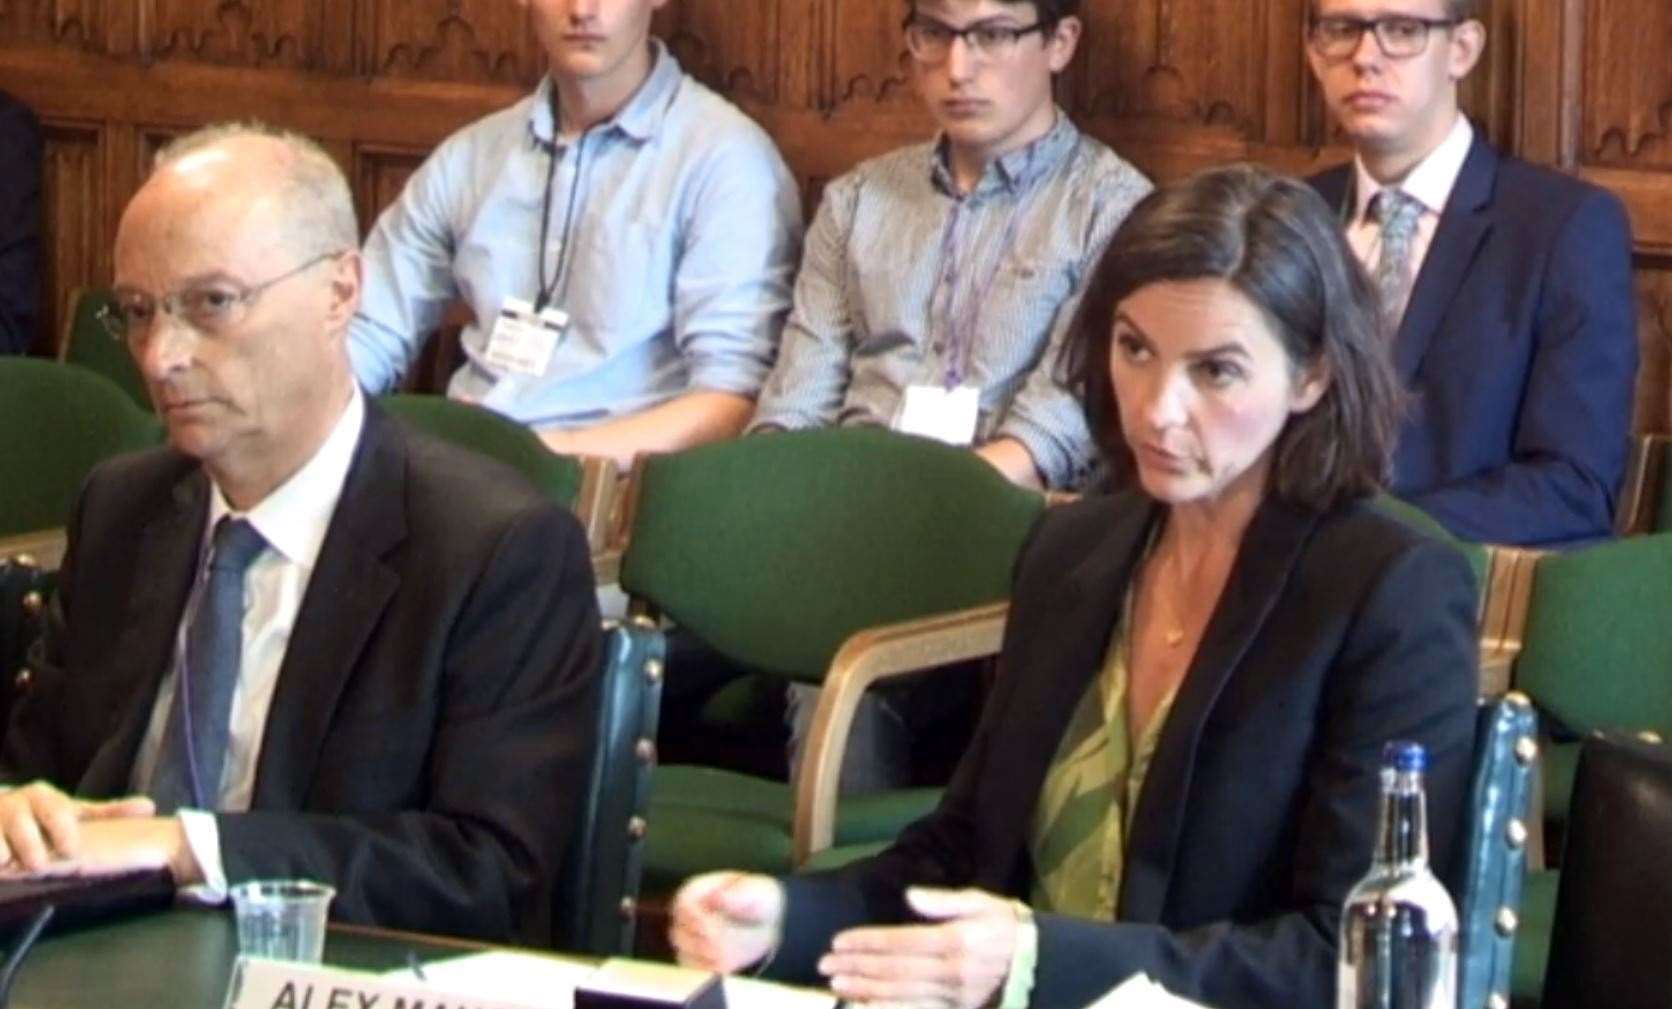 Channel 4’s chief executive Alex Mahon (right) and Channel 4 chairman Charles Gurassa at a previous appearance before the committee (House of Commons/PA)